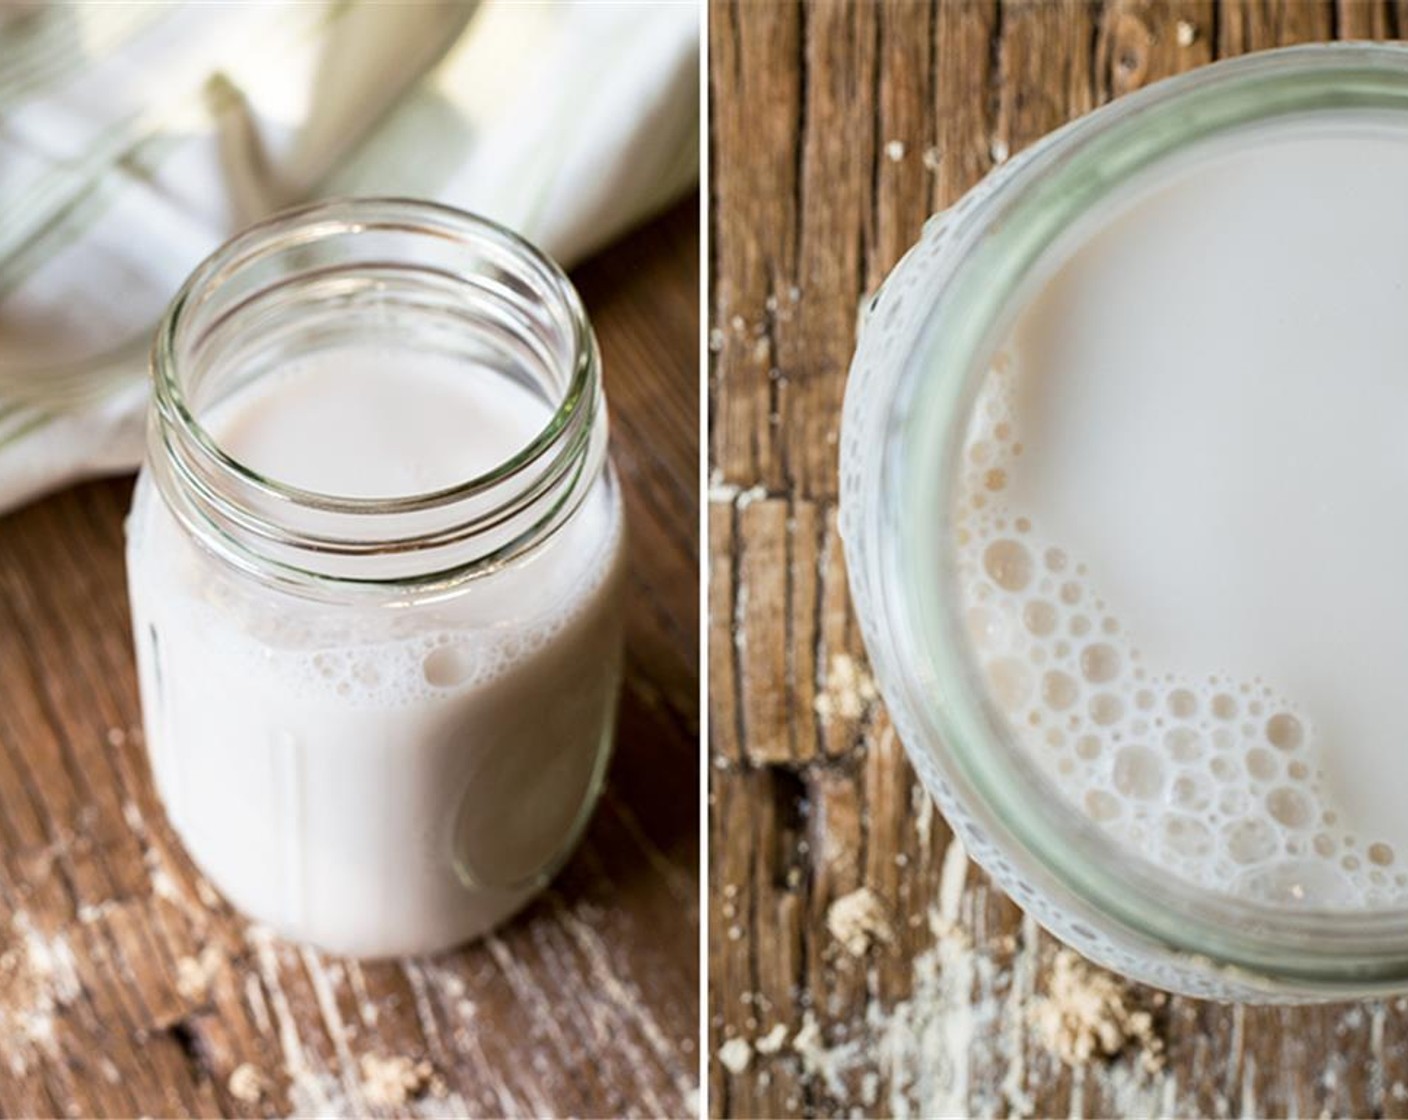 step 4 Add the Almond Milk (1 1/2 cups) and blend until smooth. Add a little more if you'd like a thinner smoothie.